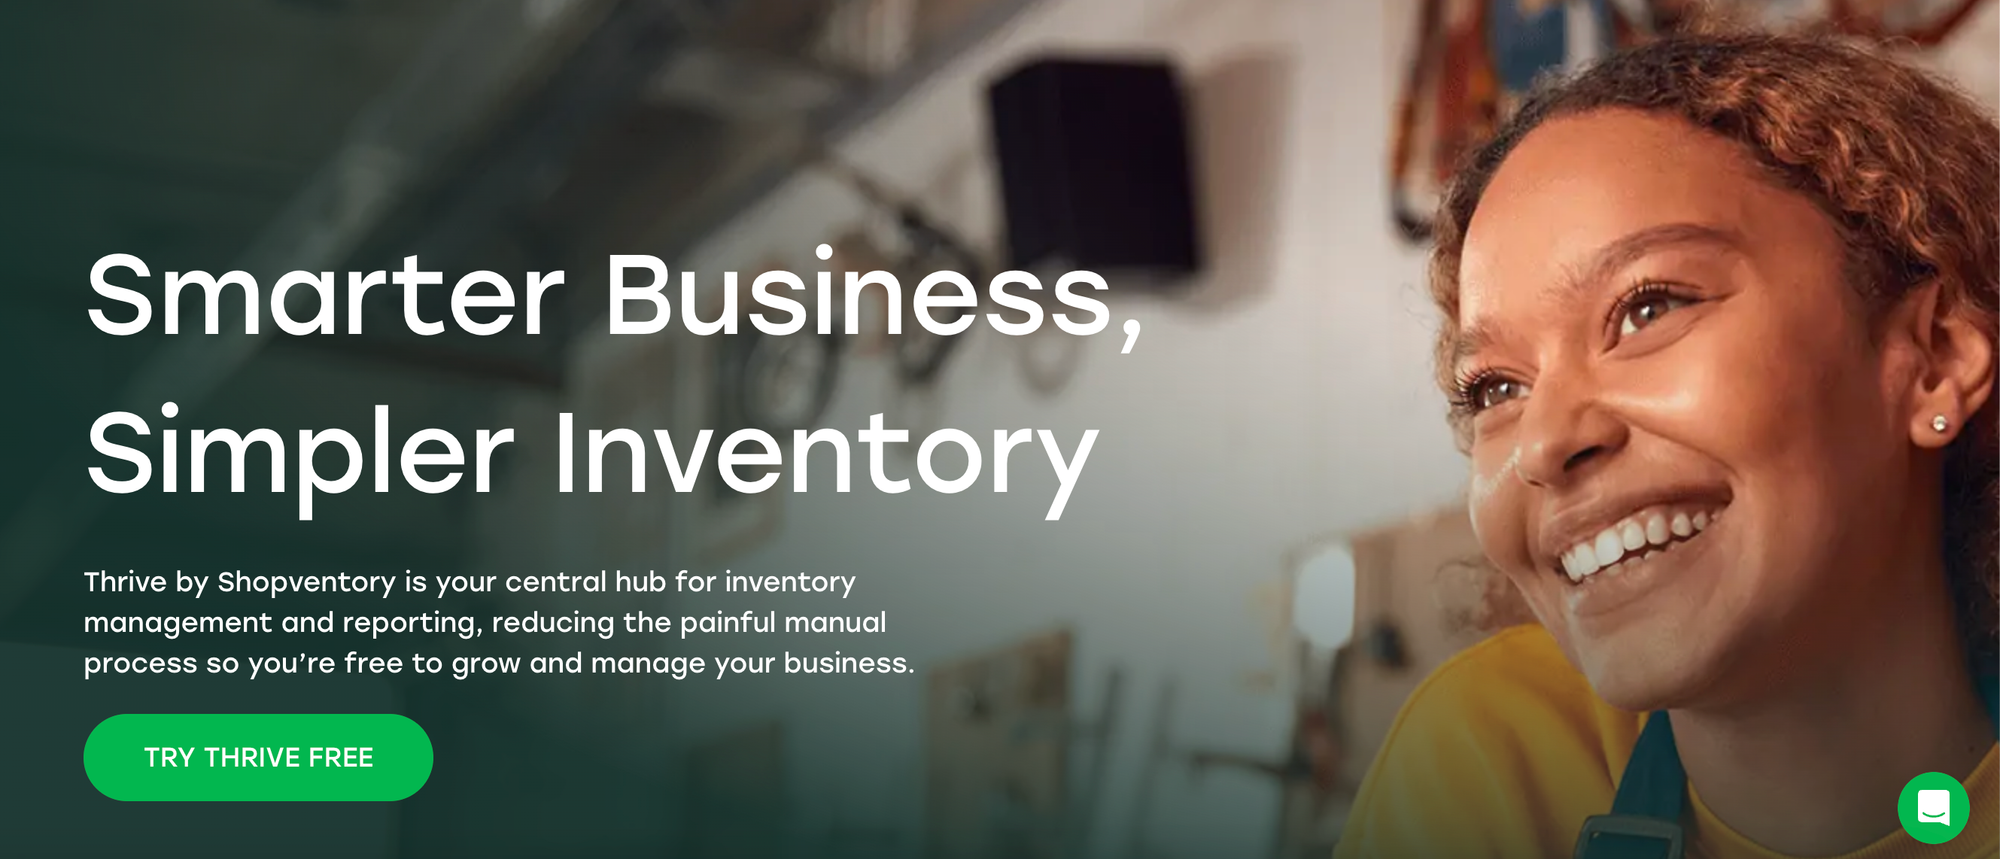 best ecommerce inventory management software